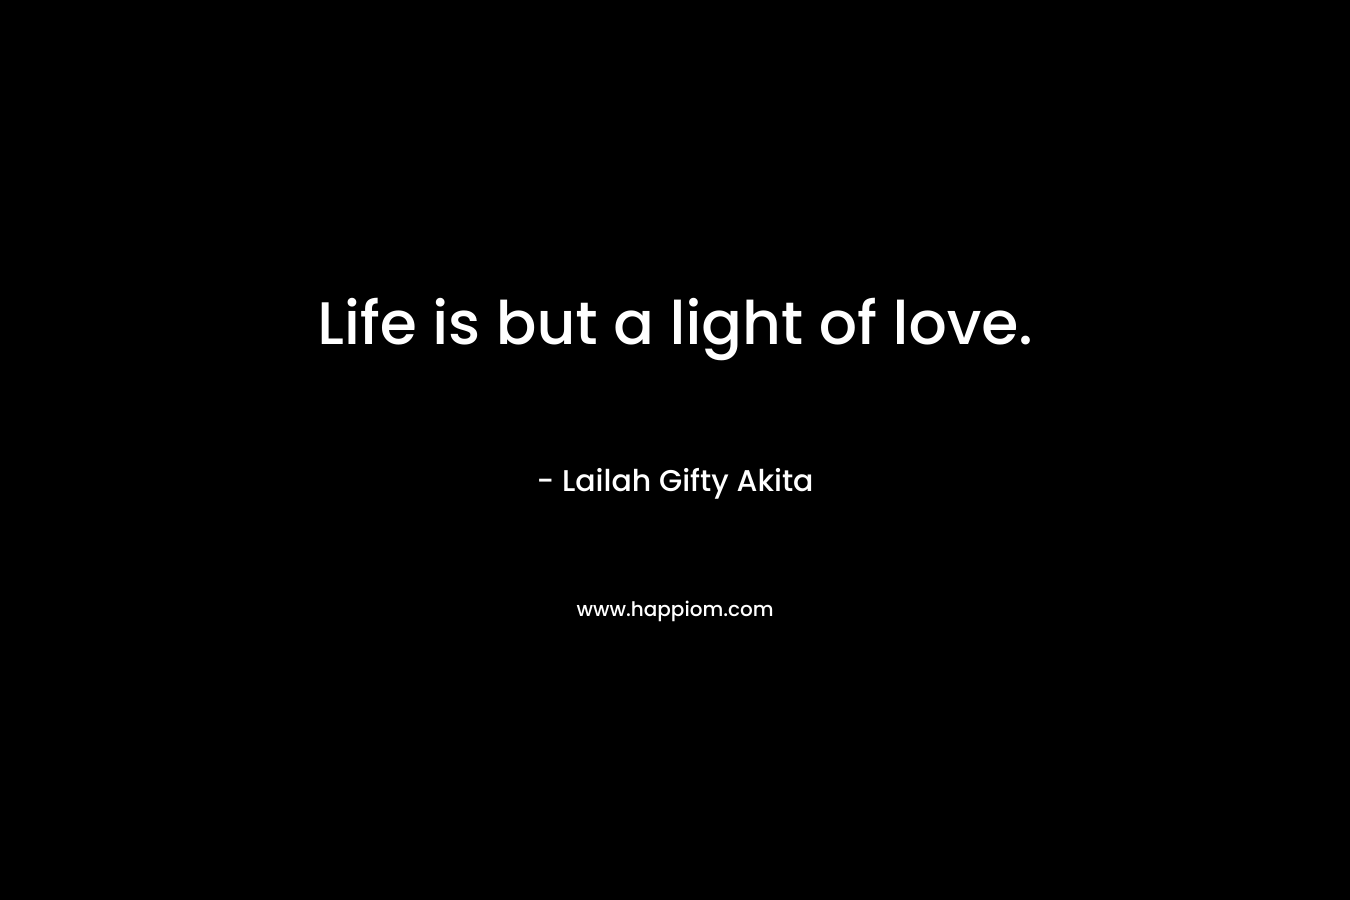 Life is but a light of love.